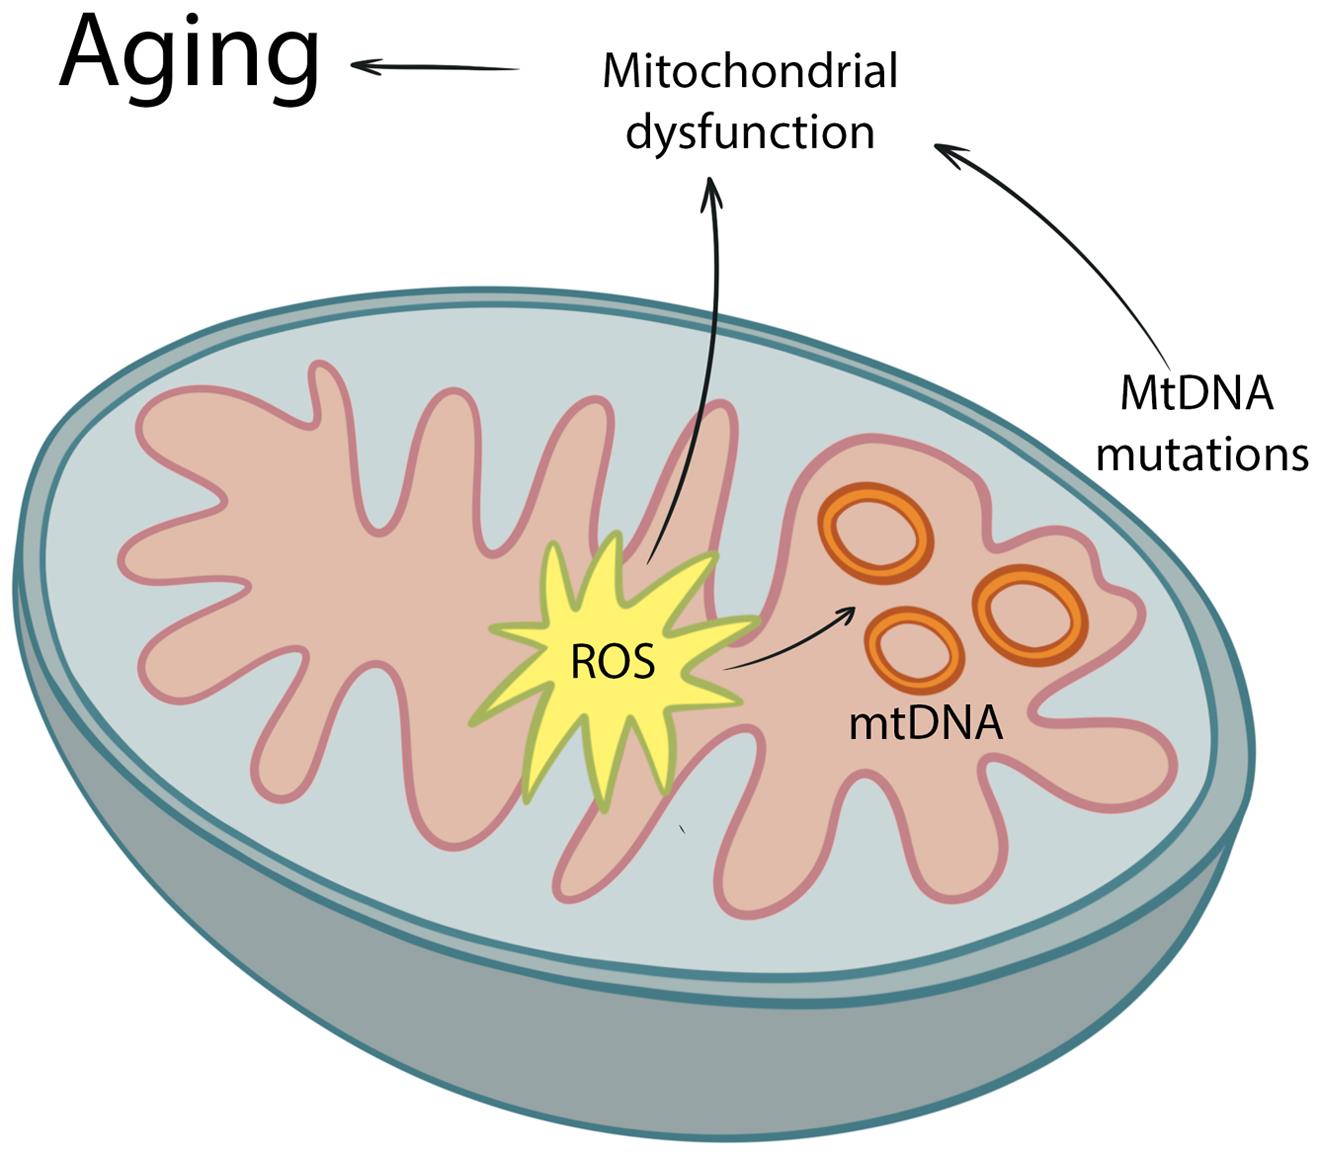 ROS can affect mtDNA, causing mutations, which lead to mitochondrial dysfunction.